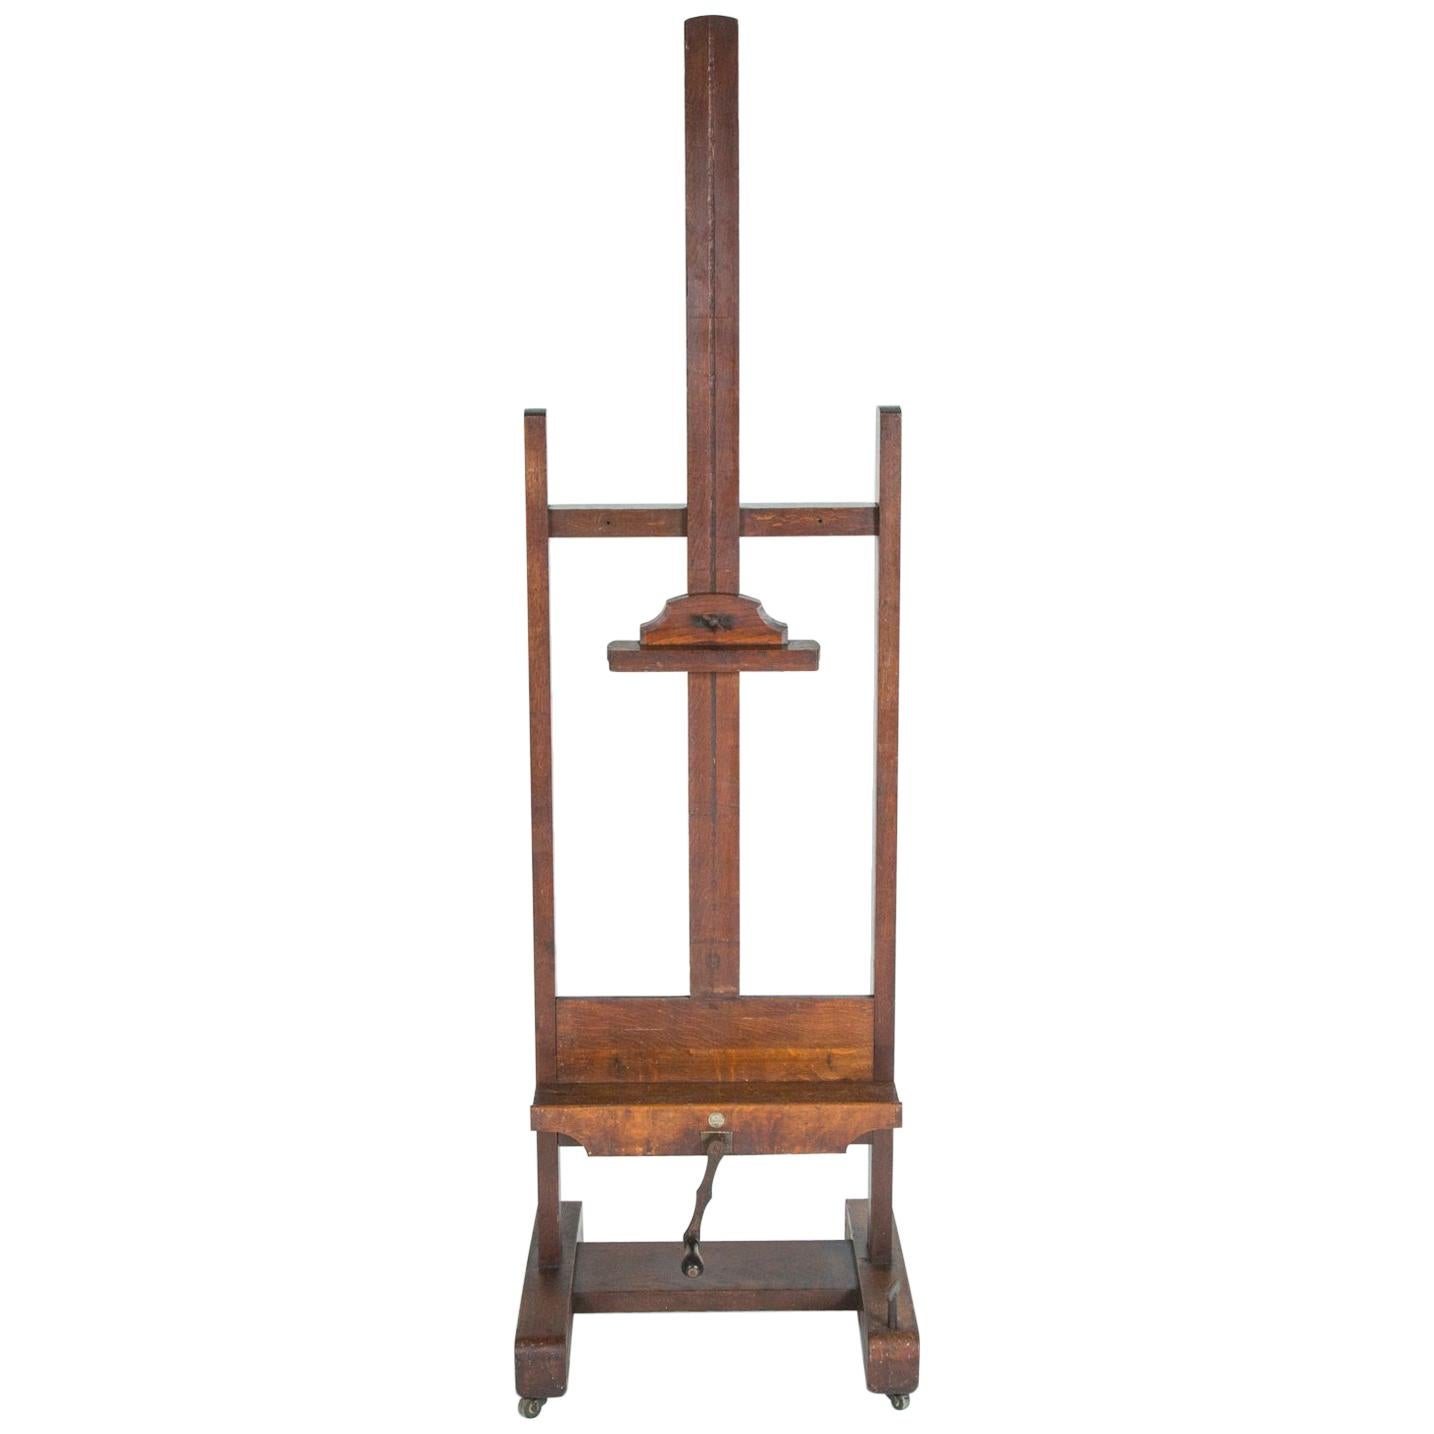 Easel by Roberson & Co. of Long Acre, London, circa 1890